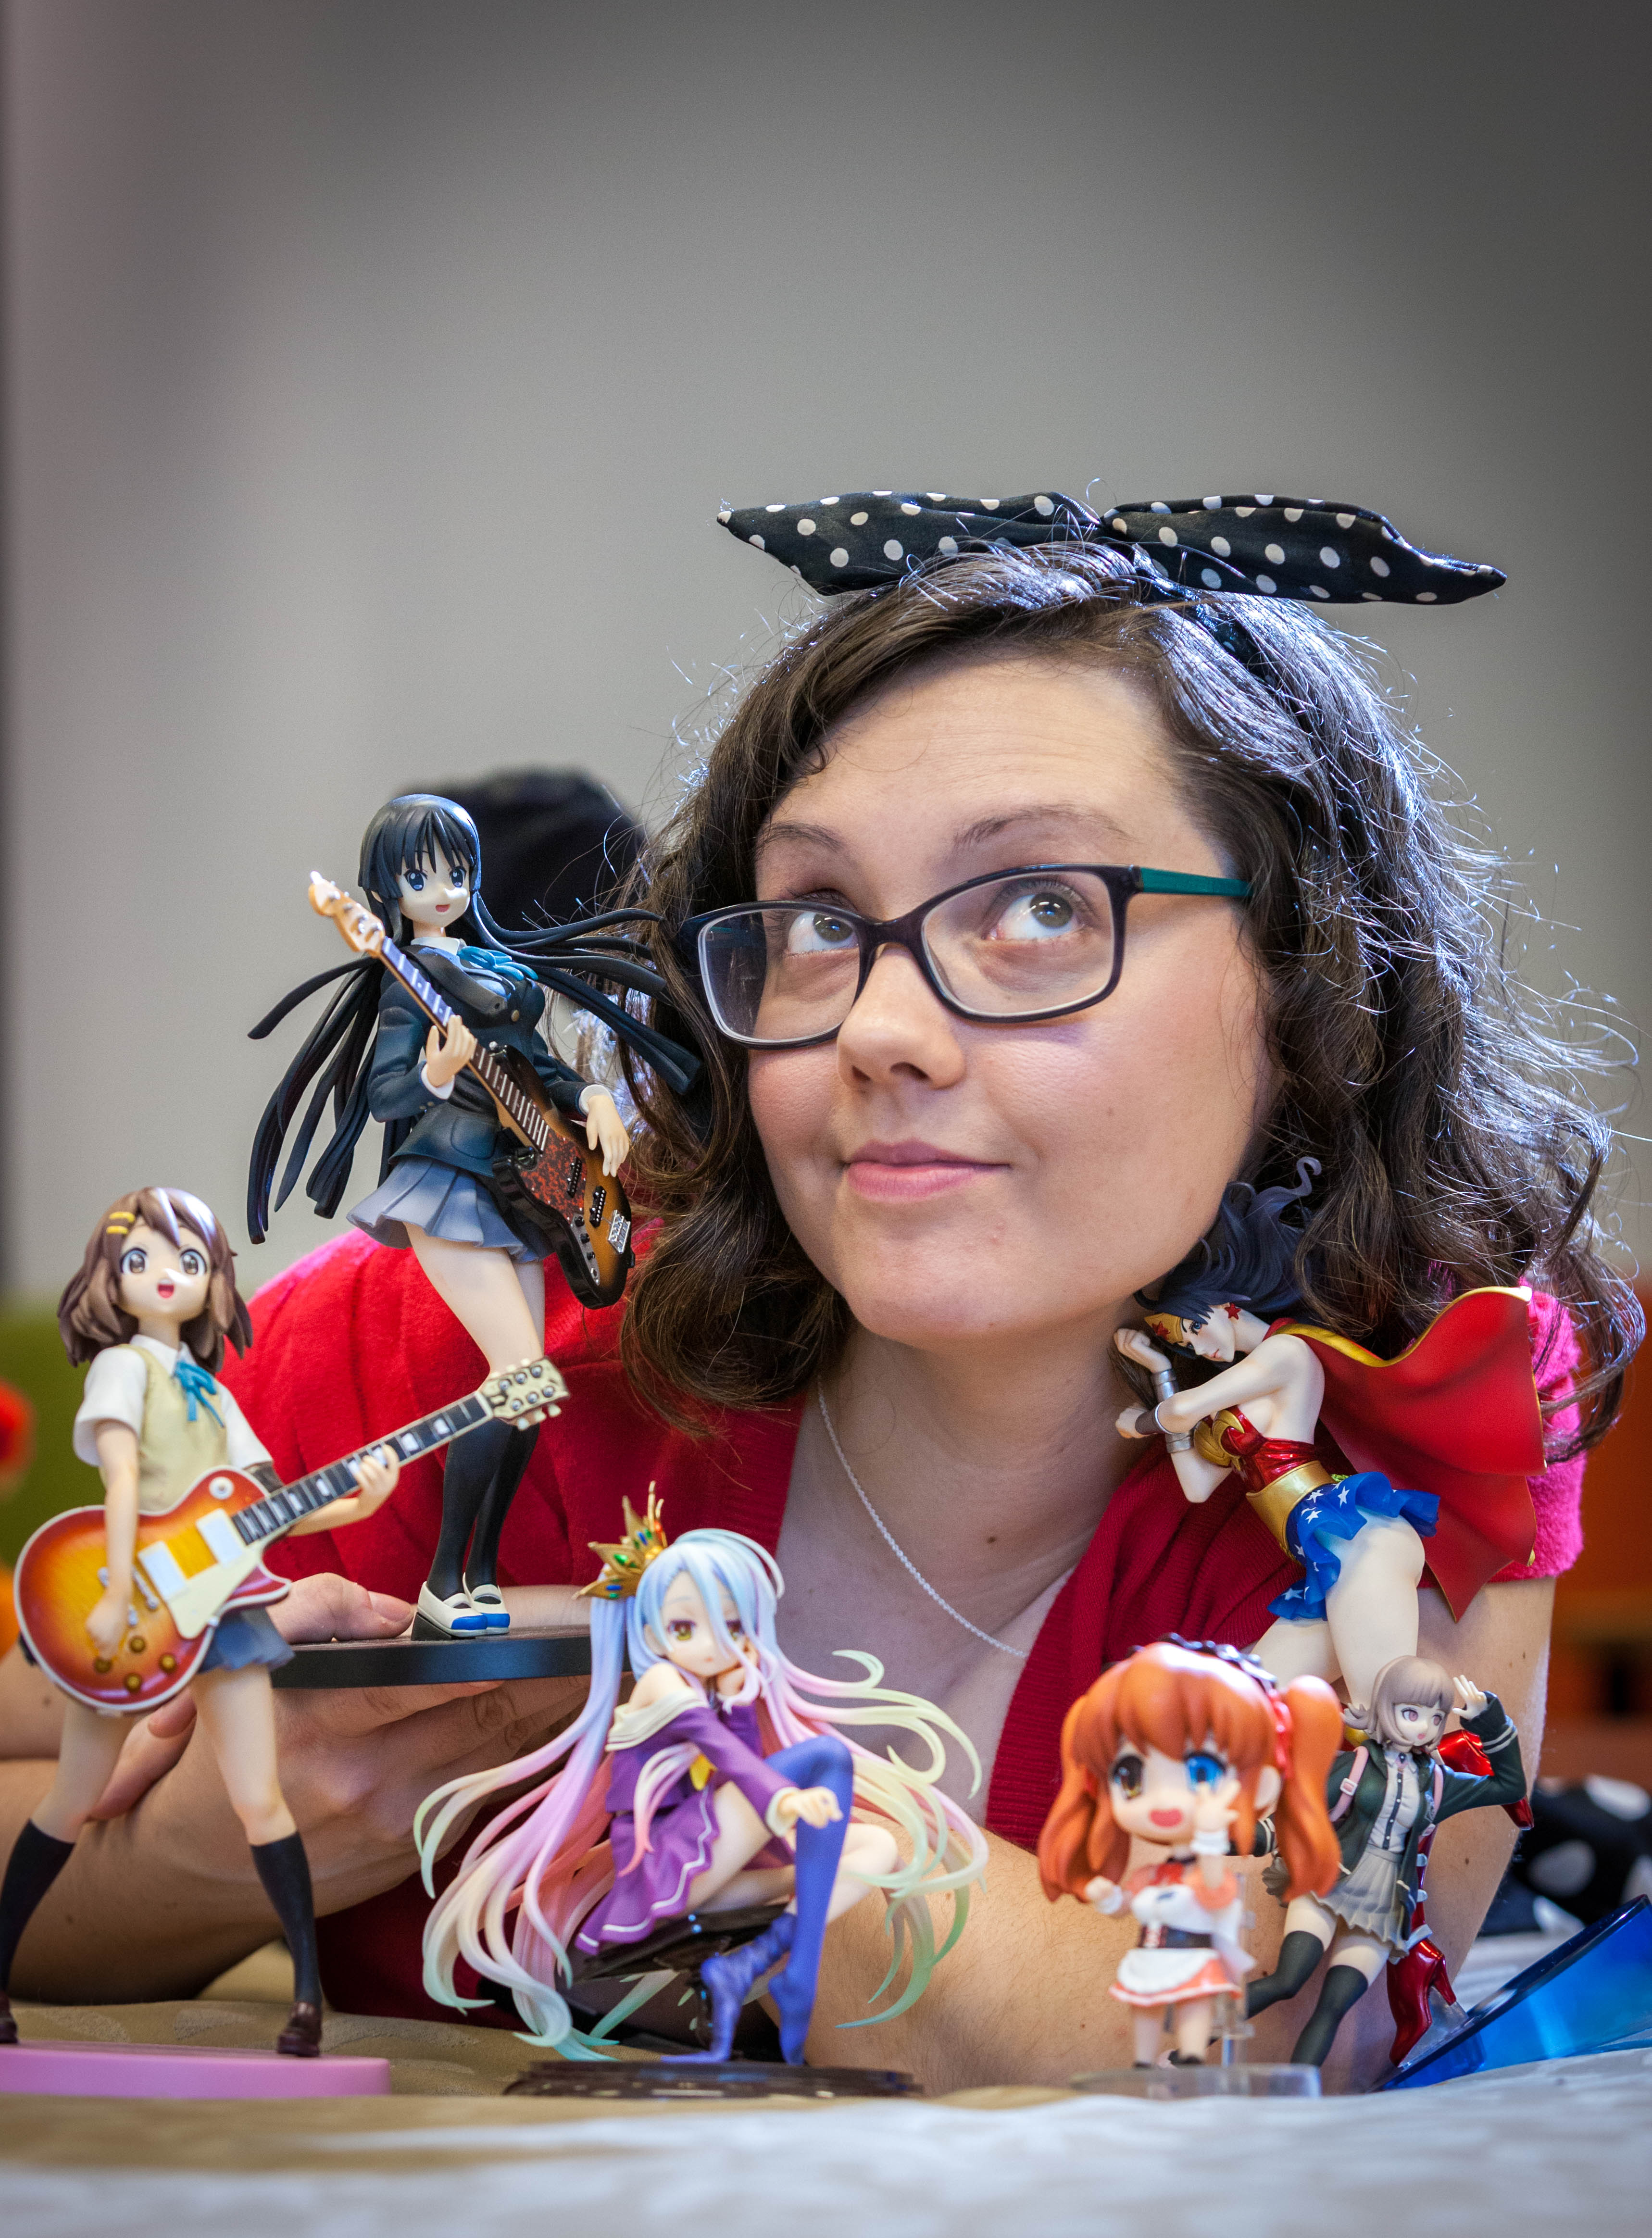 Ashley Pearson looks forward to adding to her extensive anime figurine collection while studying in Japan.